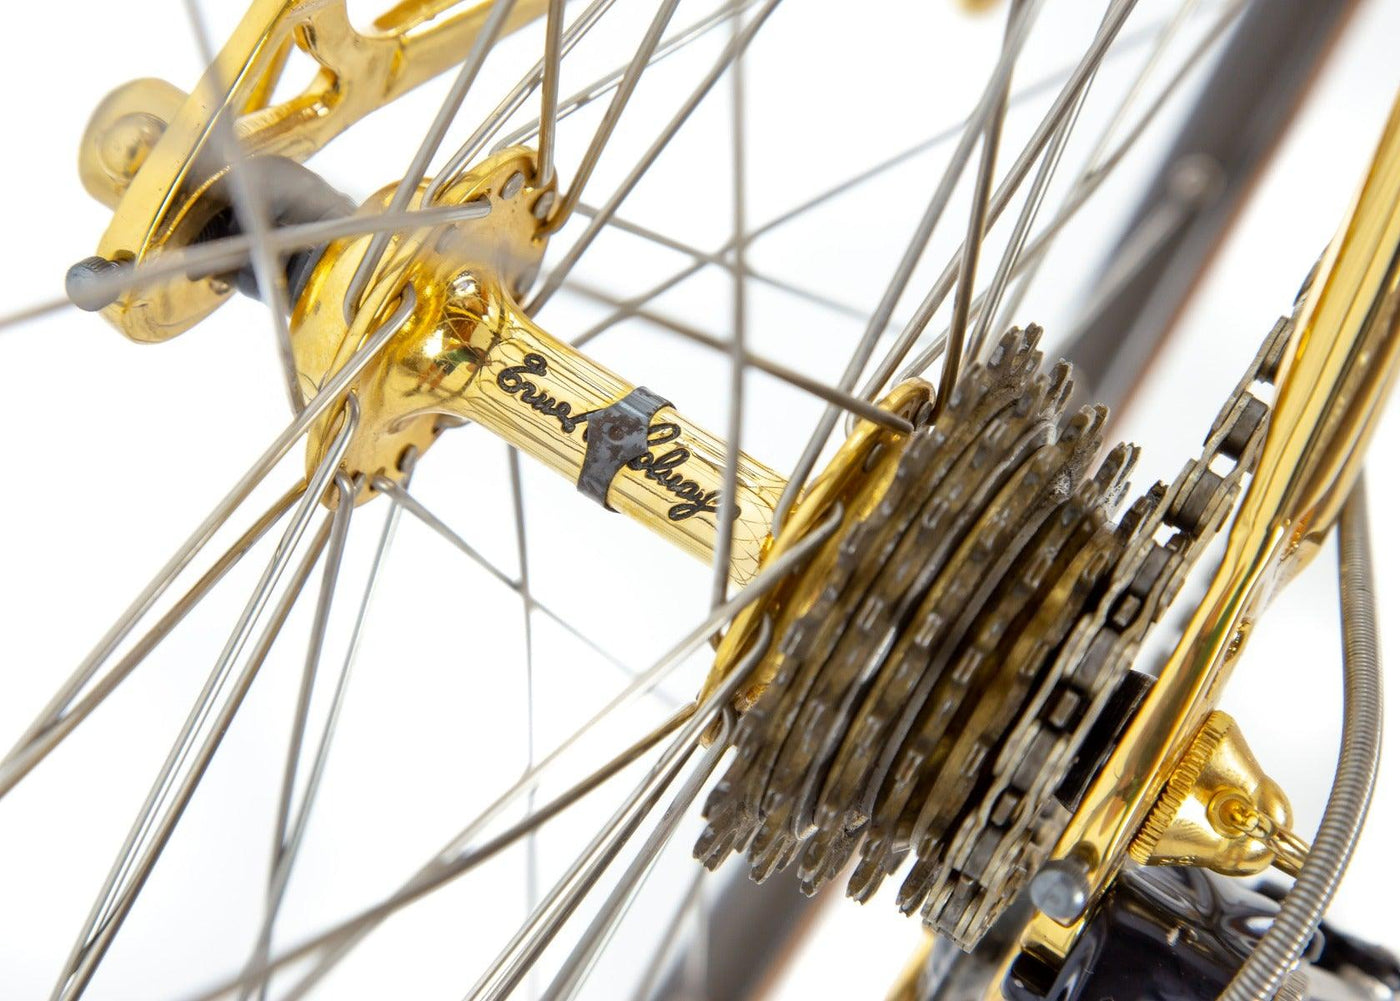 Colnago Nuovo Mexico Oro Gold Plated Bicycle - Steel Vintage Bikes